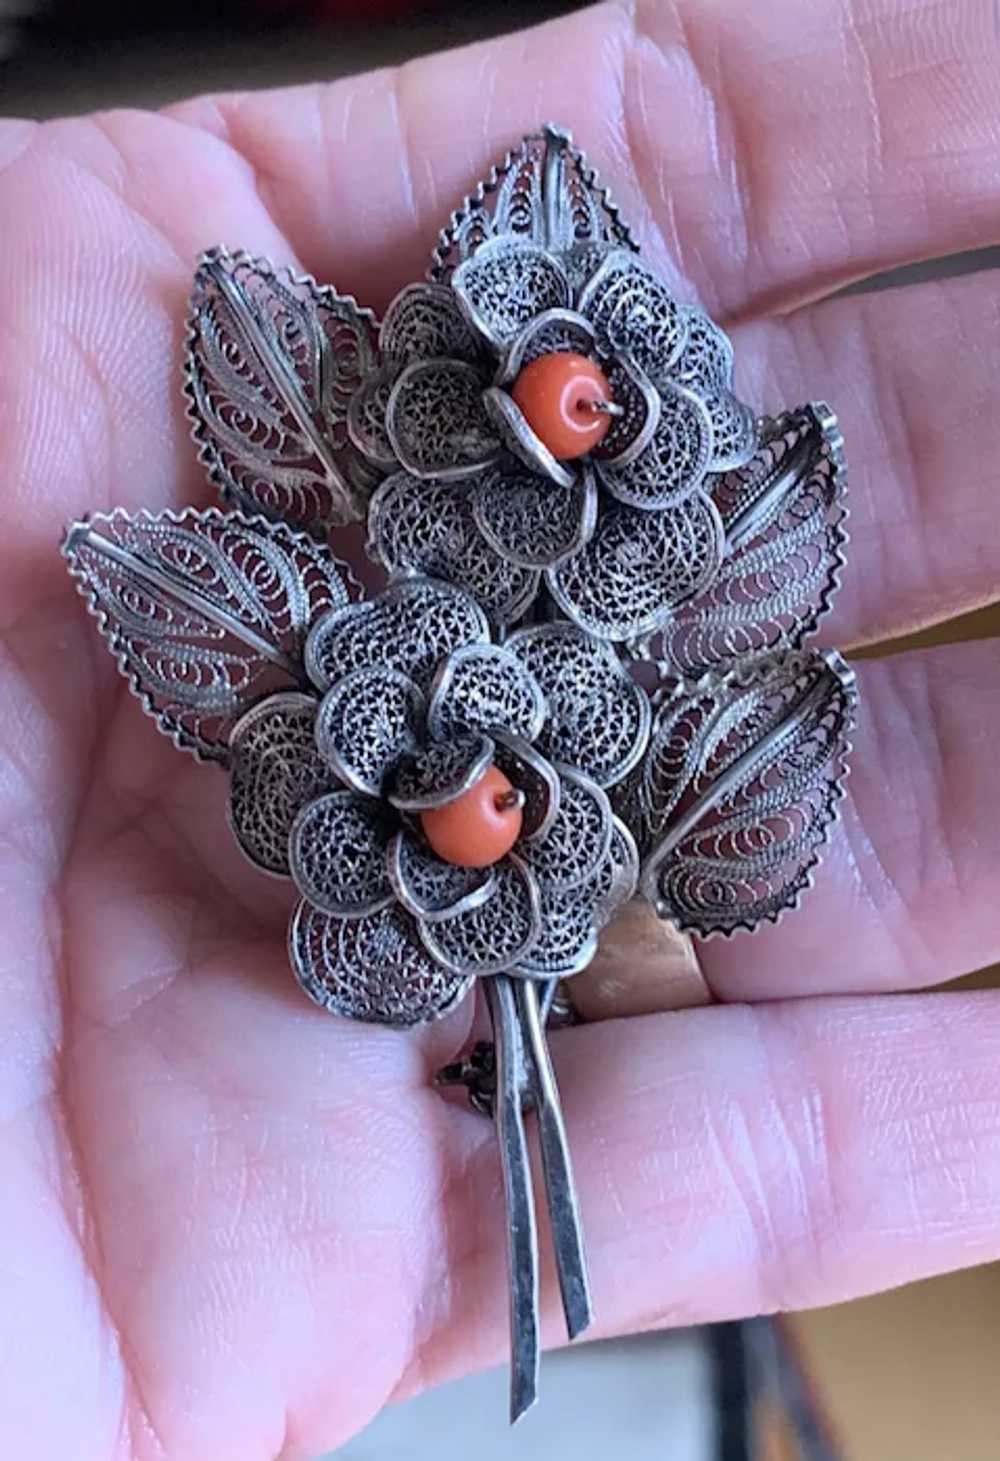 800 Silver Filigree Brooch with Coral Beads - image 6